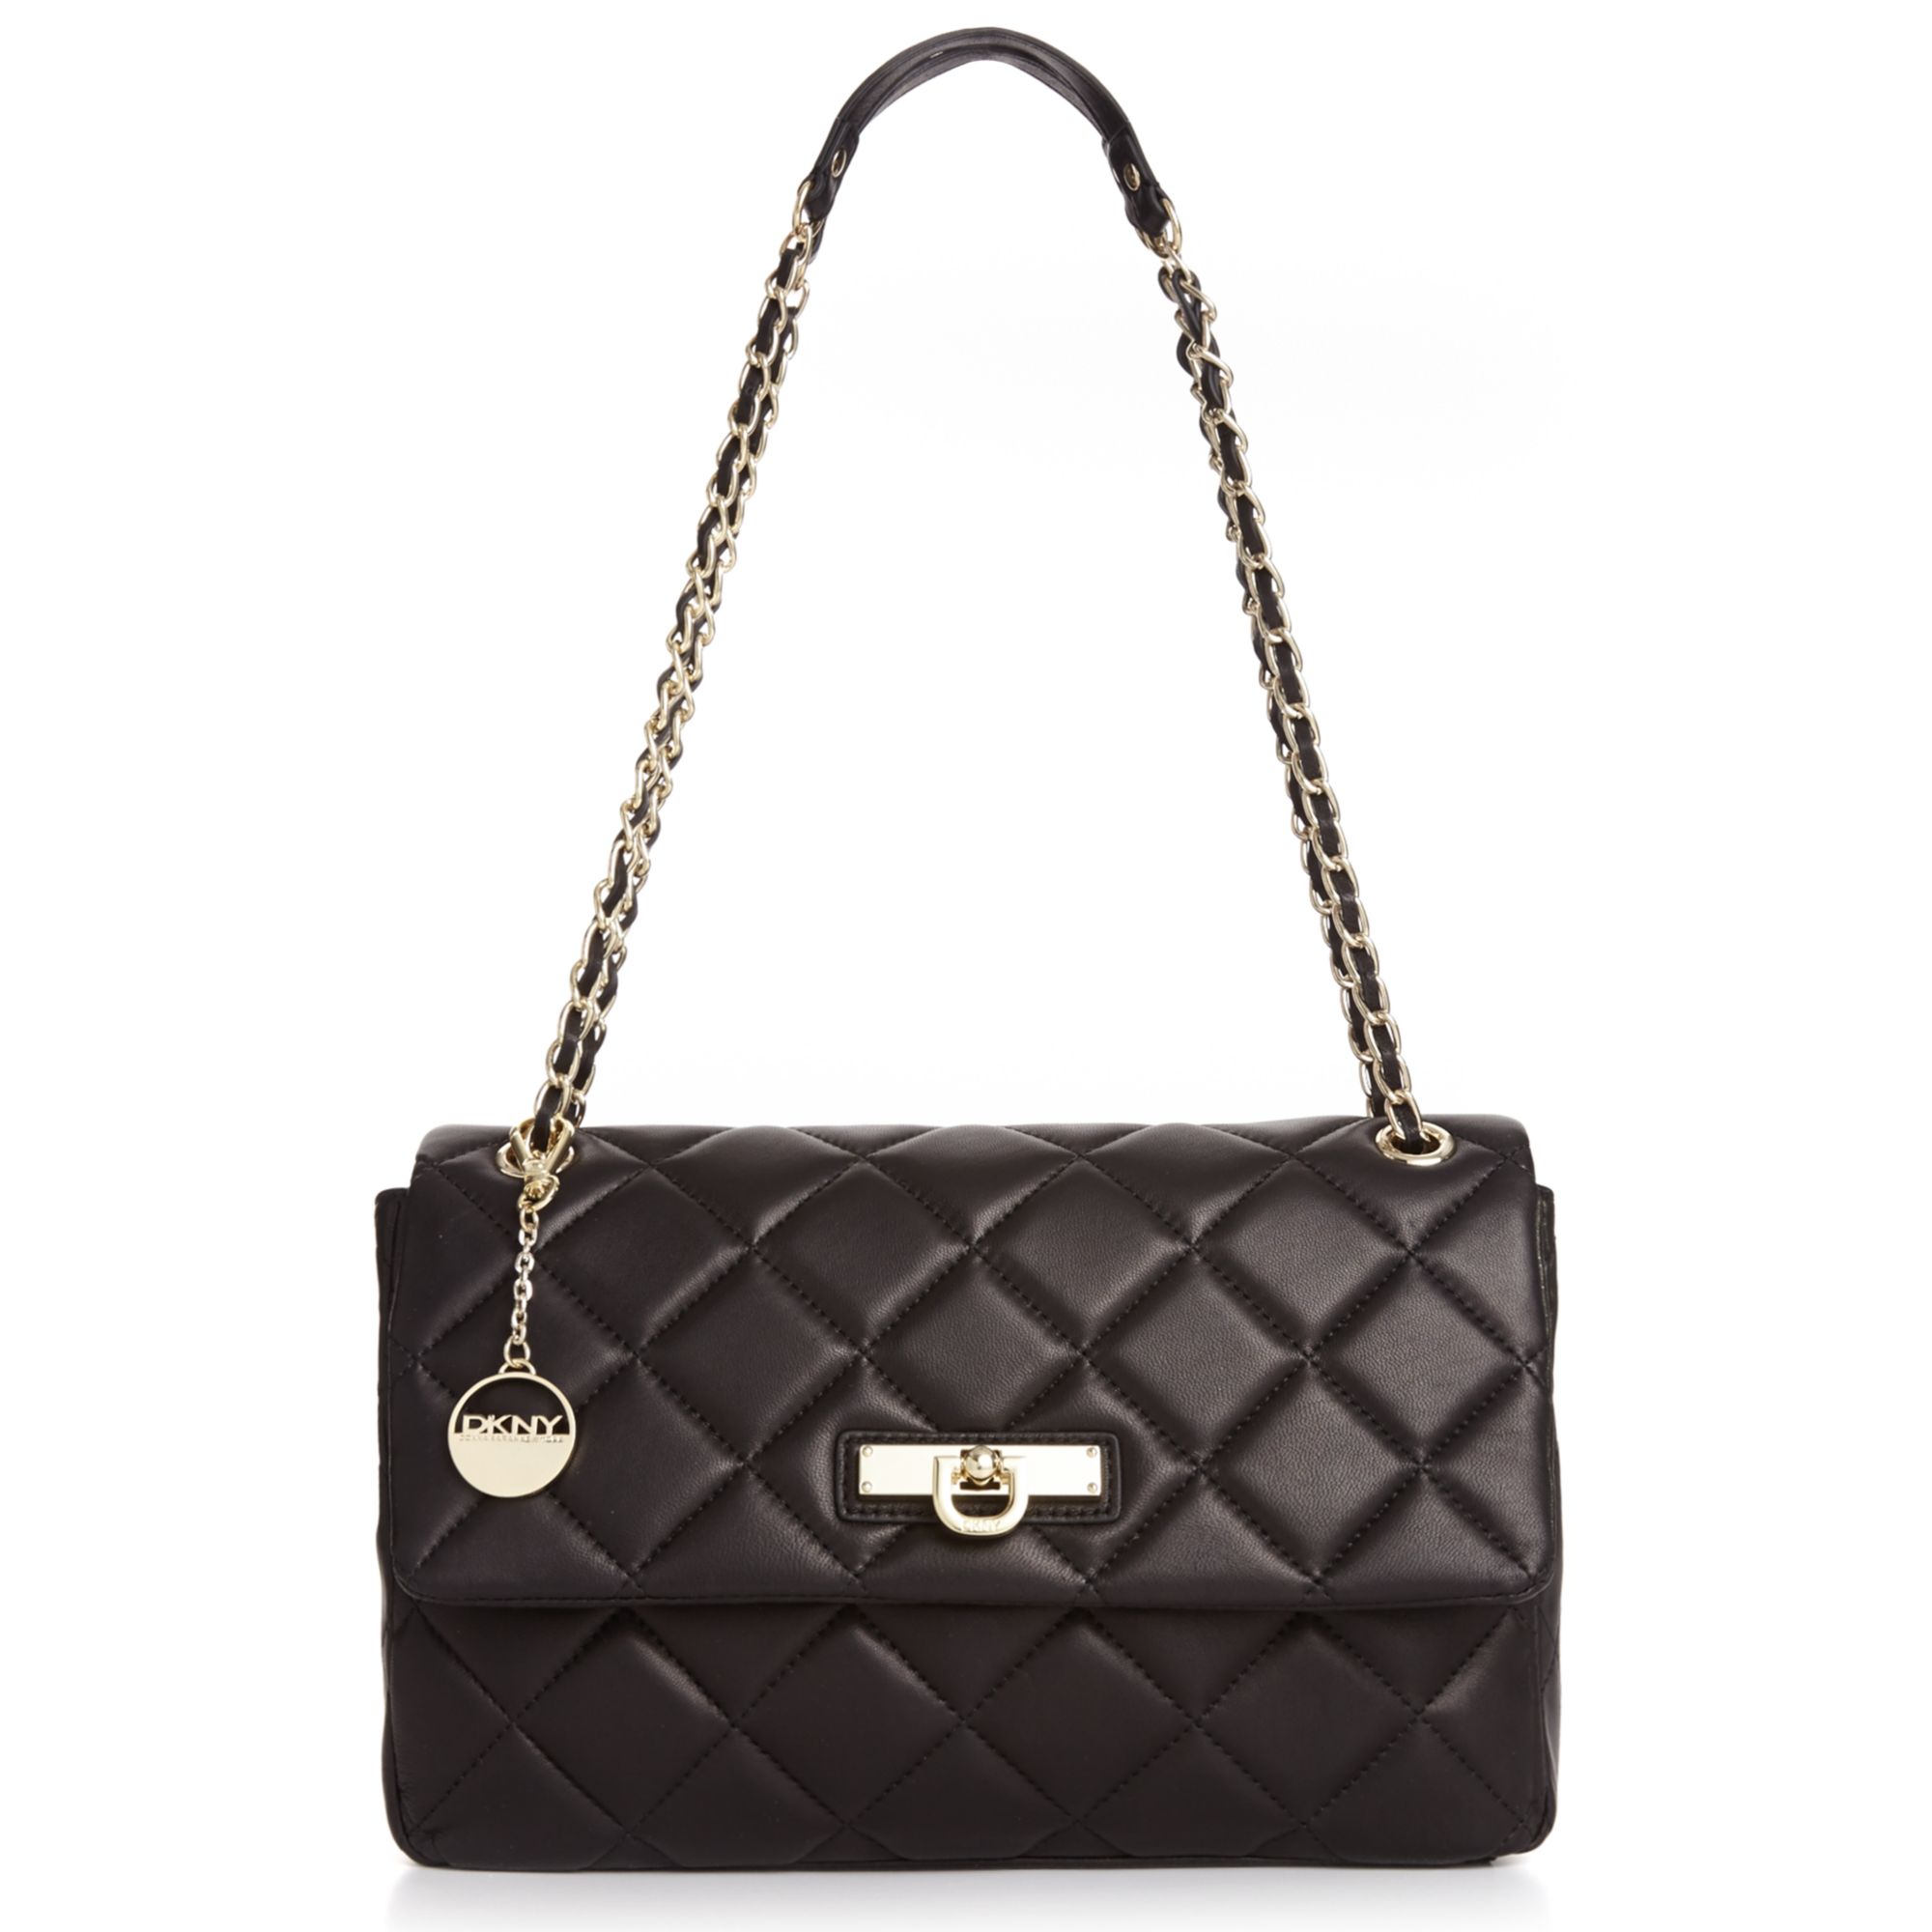 Dkny Quilted Nappa Adjustable Chain Shoulder Bag in Black | Lyst